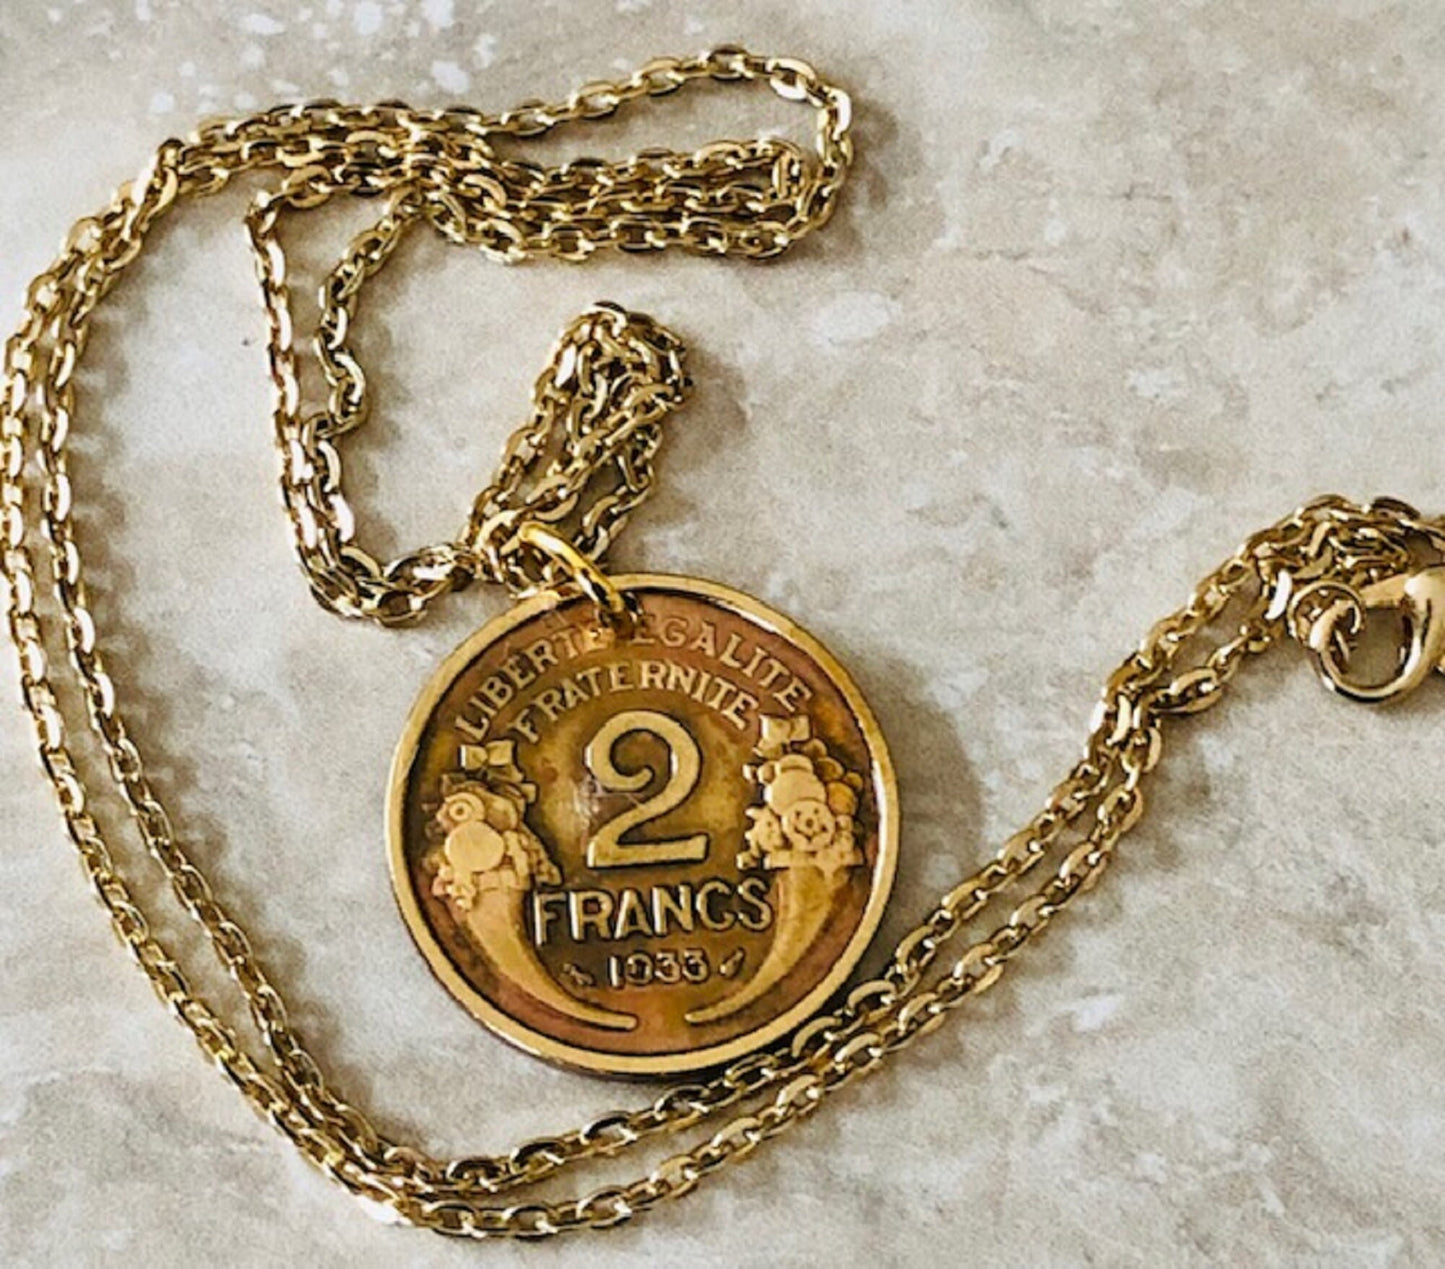 France Coin Necklace Pendant 2 Francs LIBERTE EGALITE FRATERNITE Custom Made Rare coins - Coin Enthusiast Necklace - Choose your date